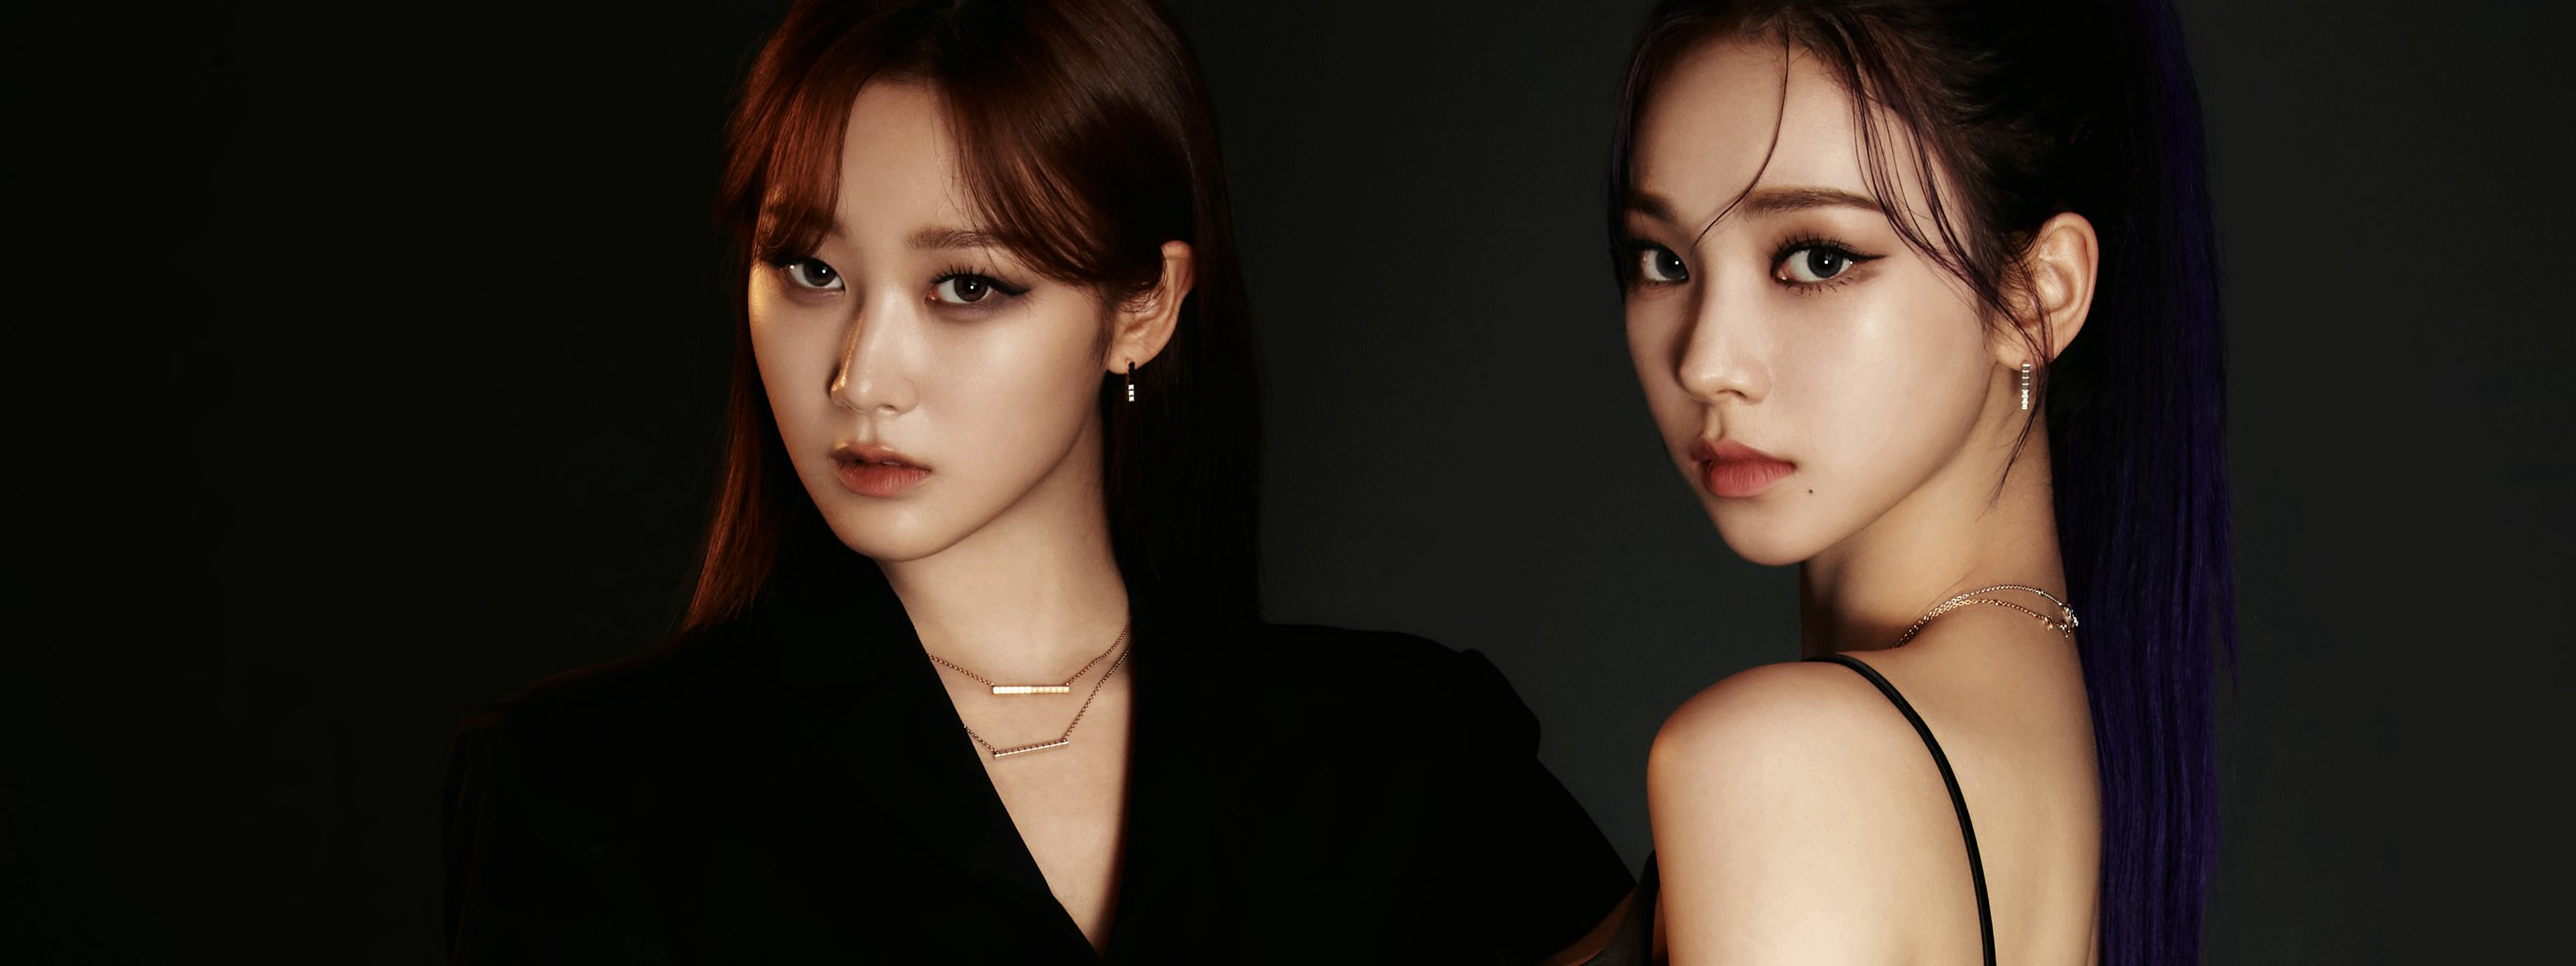 Chopard ambassadors K-pop group aespa rock contemporary Ice Cube jewellery with its convention-challenging graphic cubic shapes.